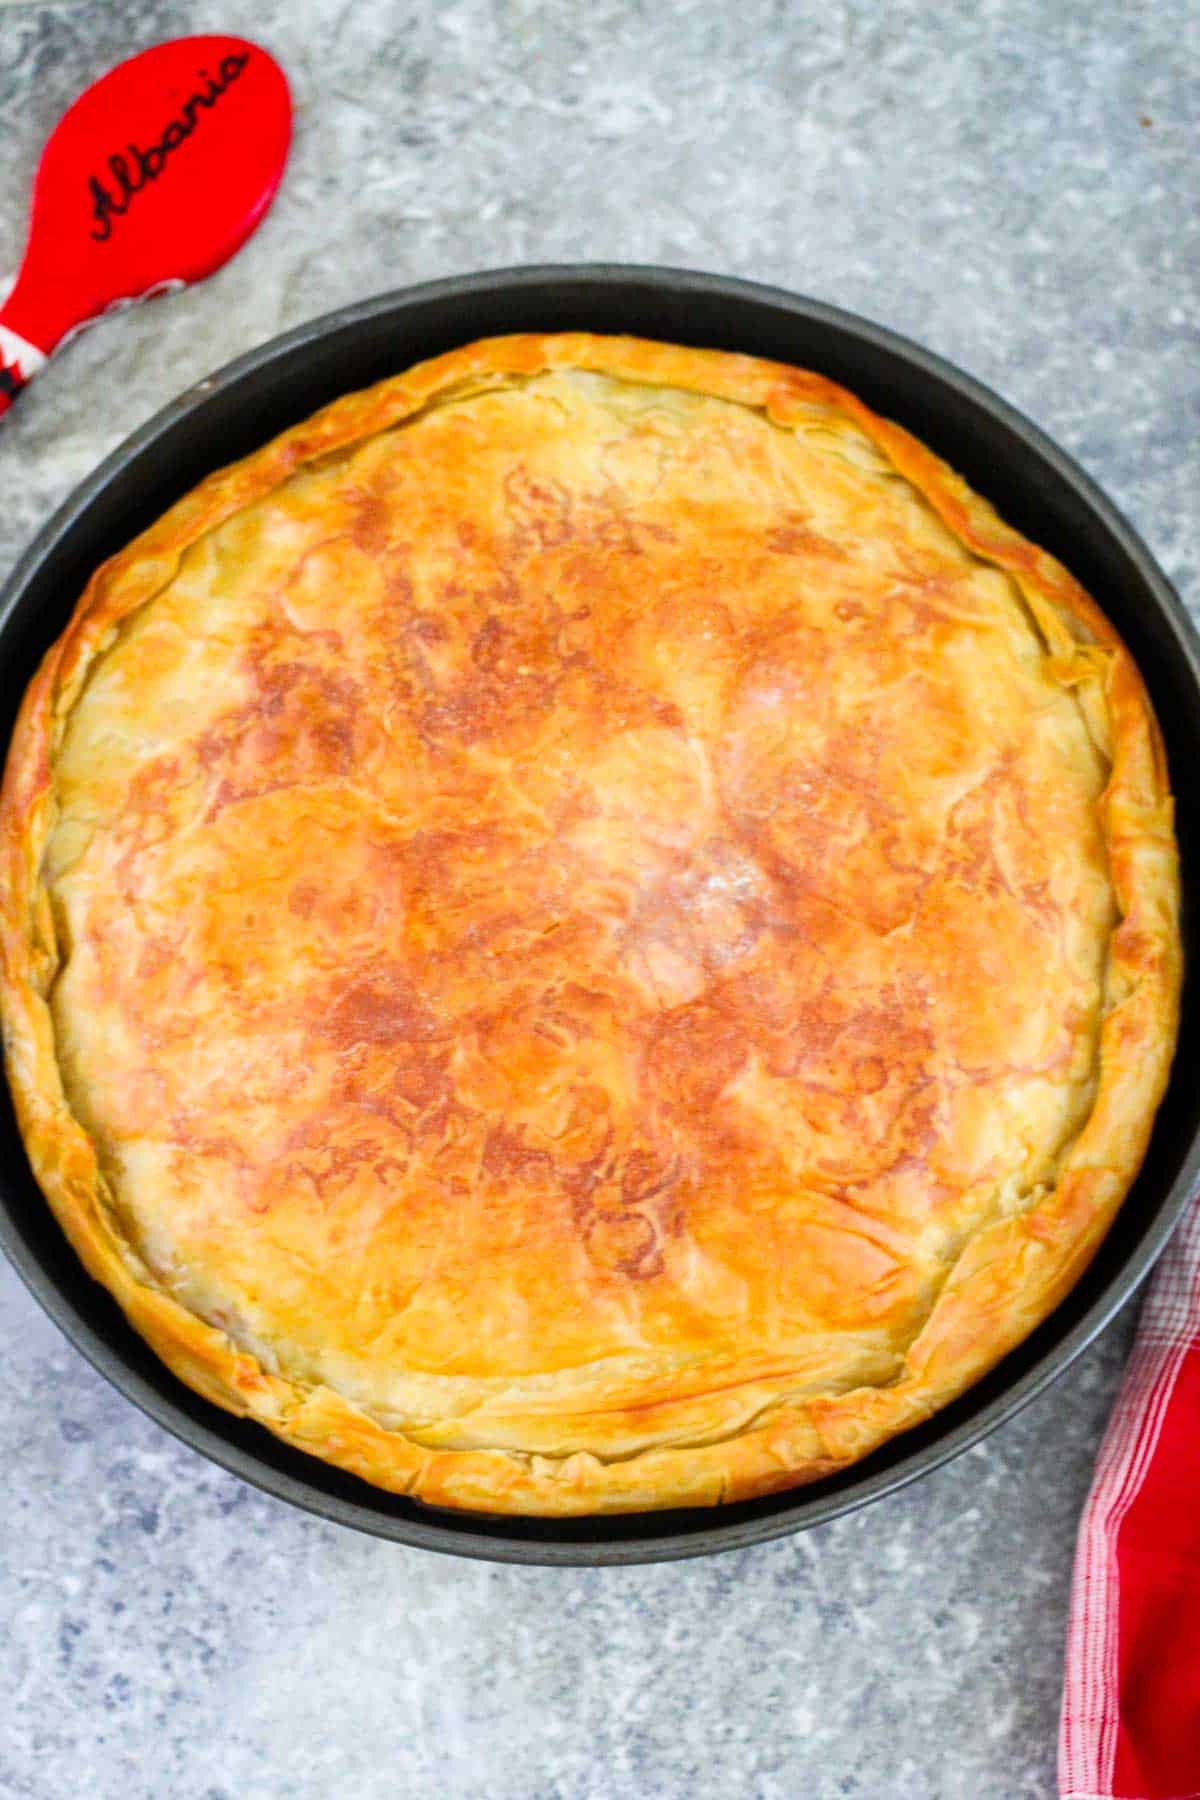 A round baking tray that shows a baked phyllo meat pie. Pie is tucked in on the edges and looks golden brown crispy. There's a red wooden spoon that reads Albania on top and a red kitchen towel on the right hand side of the baking tray.